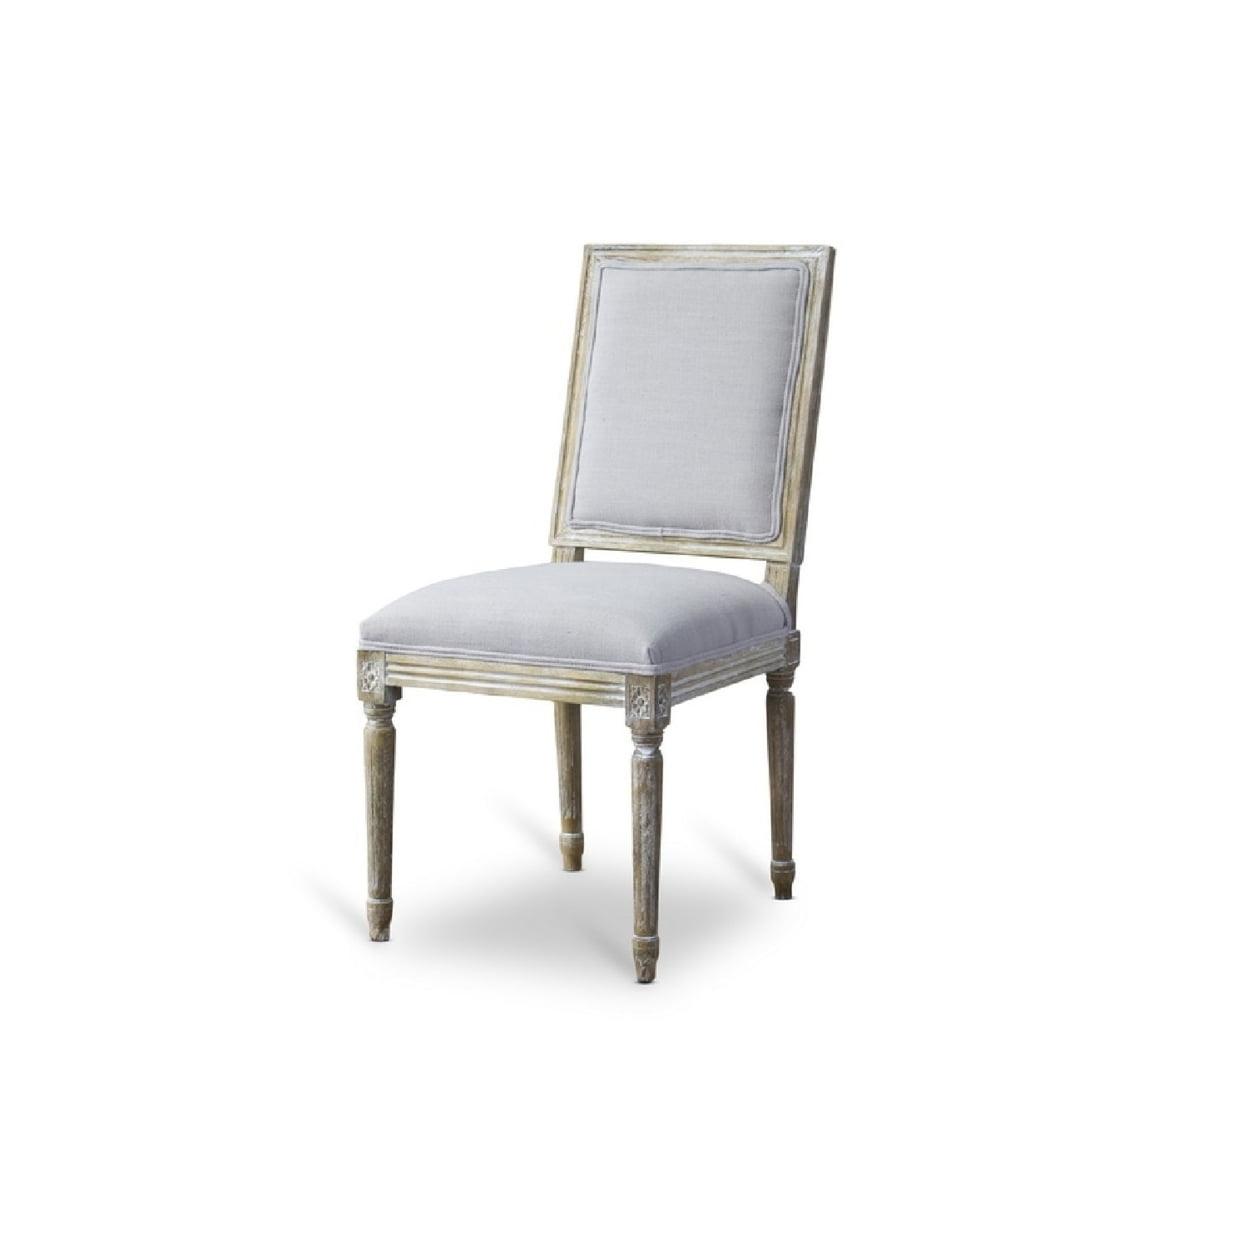 Clairette Beige Linen & Birch Wood Traditional French Accent Chair